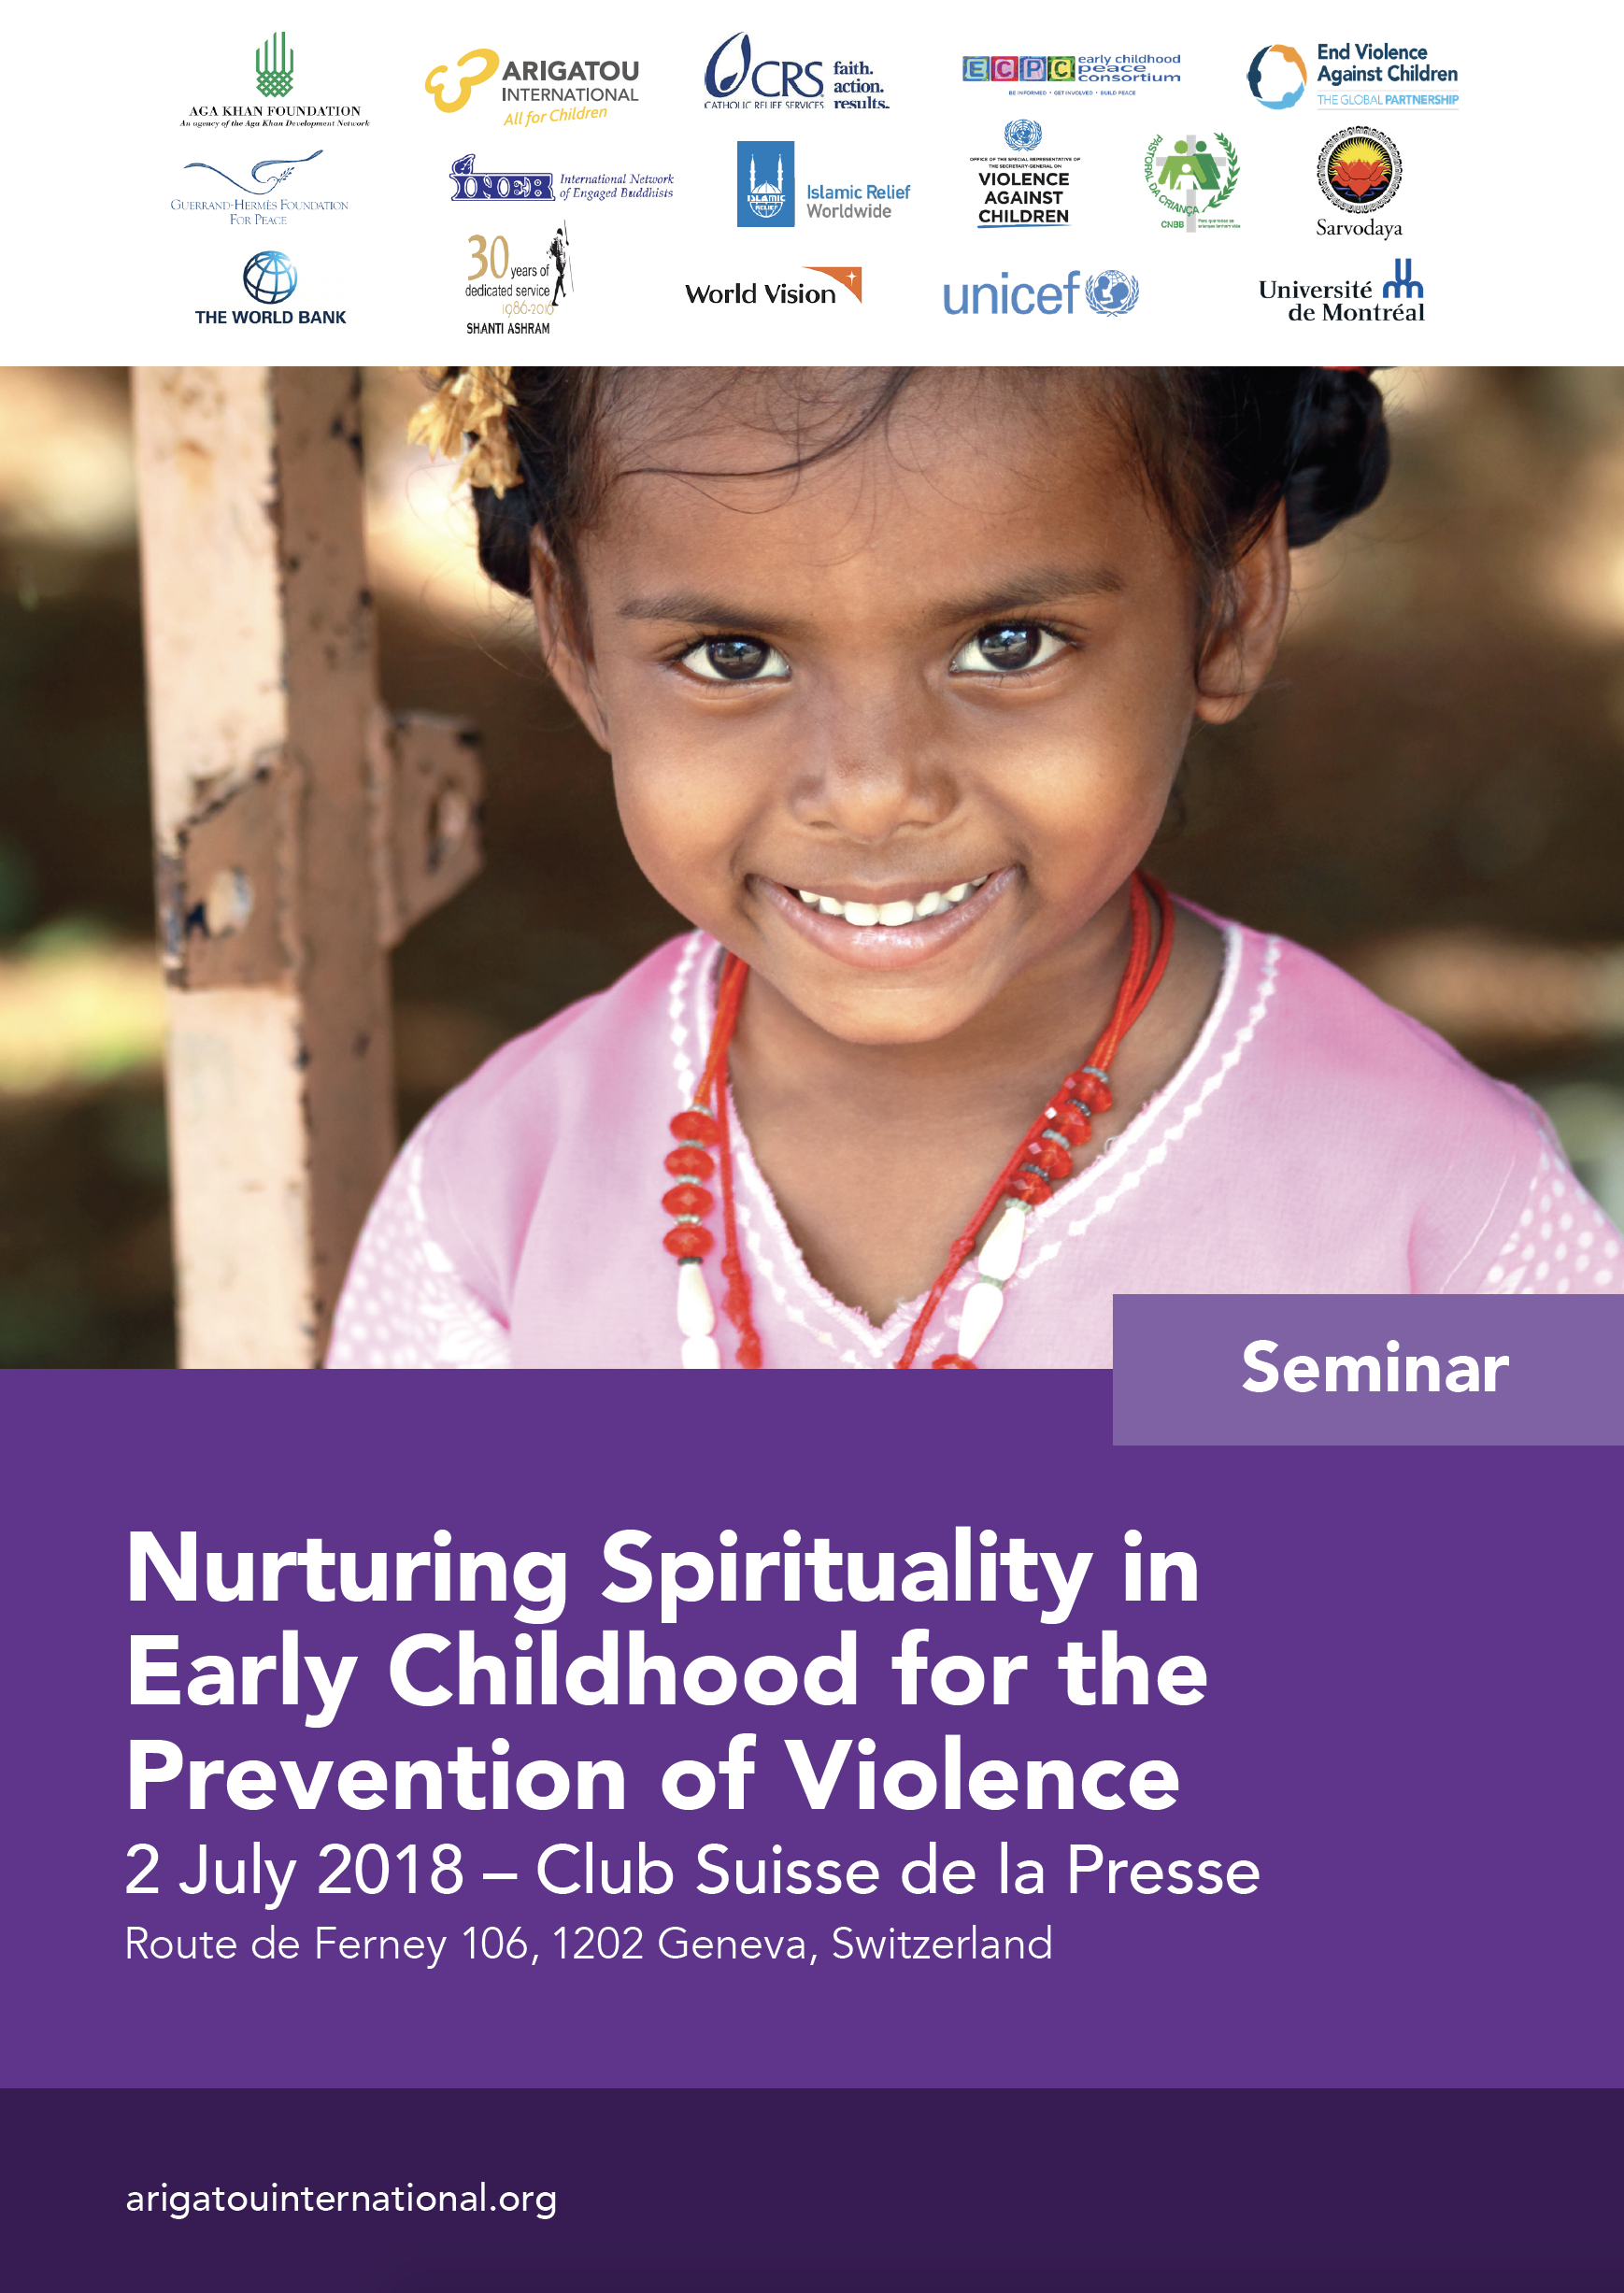 Nurturing Spirituality in Early Childhood for the Prevention of Violence thumbnail